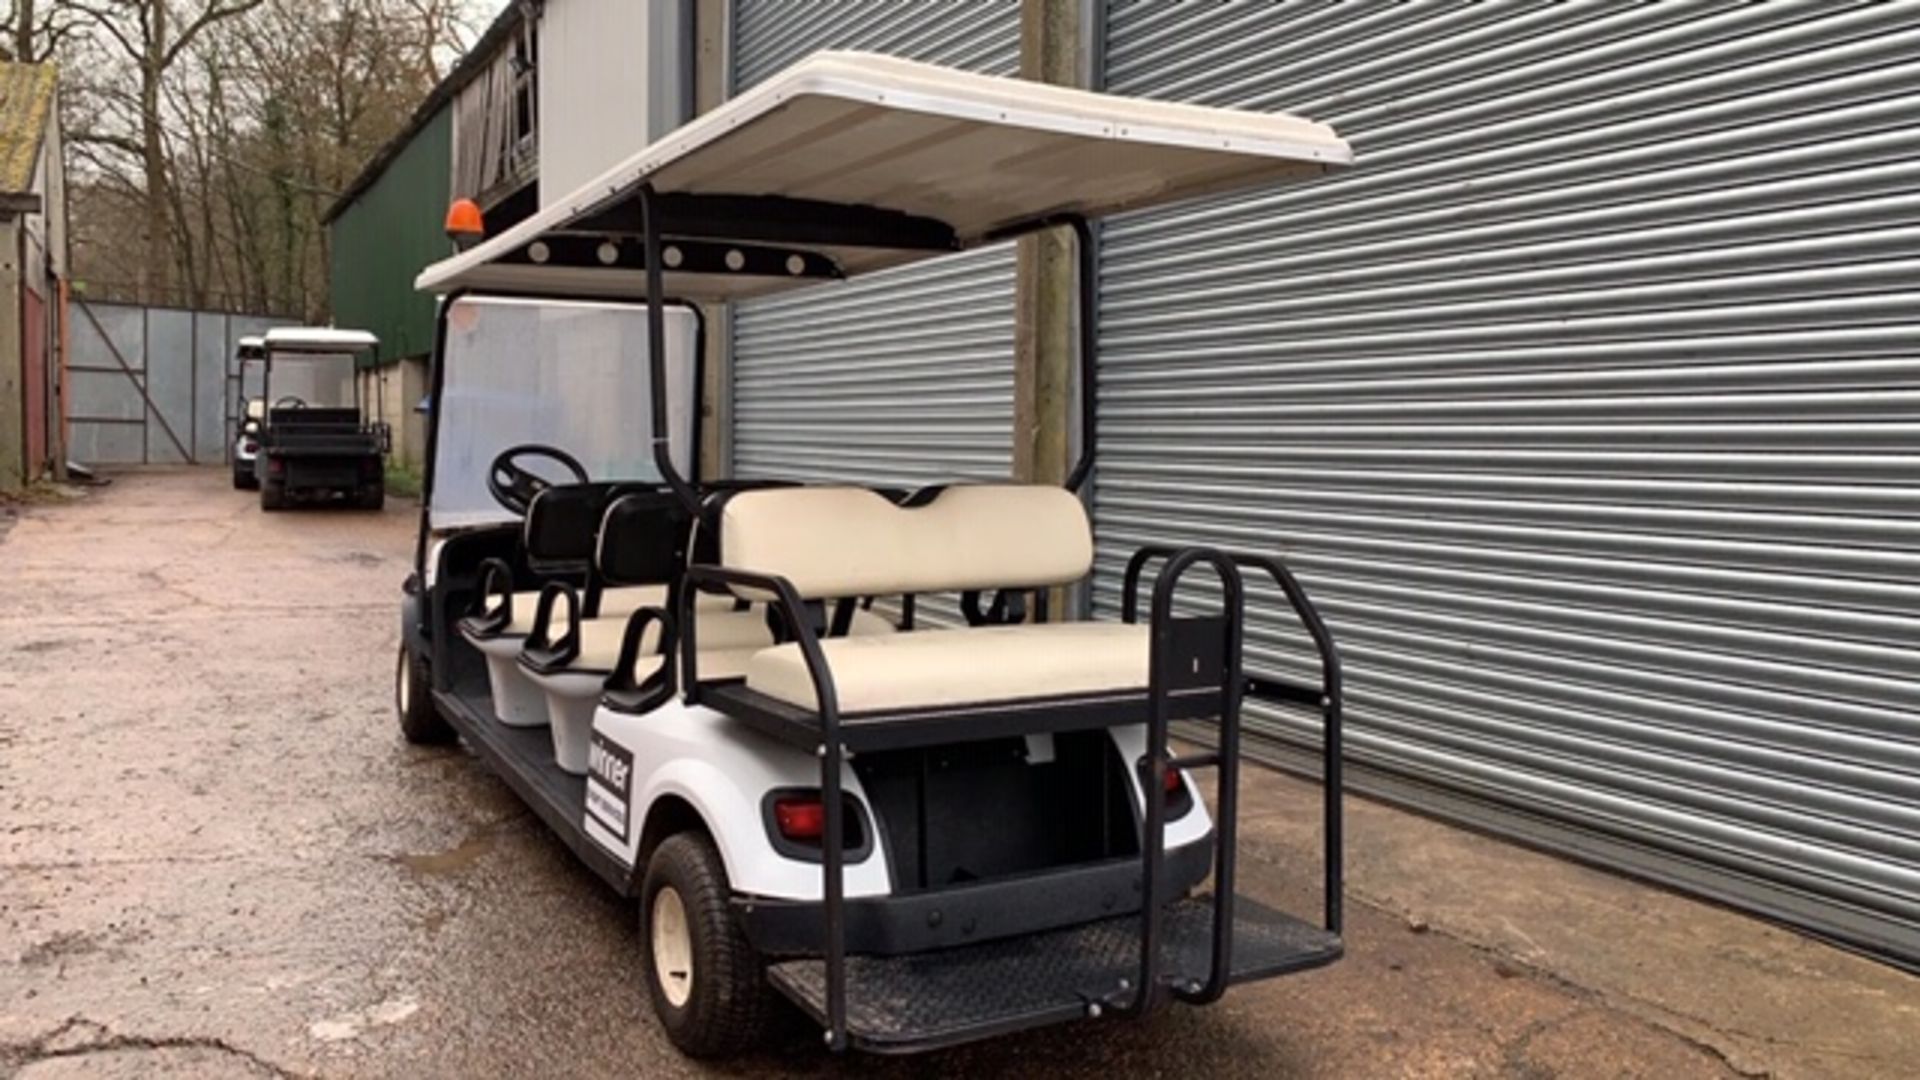 CUSHMAN EZGO SHUTTLE 8 PETROL ENGINED 8 SEATER GOLF / EVENTS BUGGY. YEAR 2017 BUILD. DIRECT FROM - Image 3 of 6